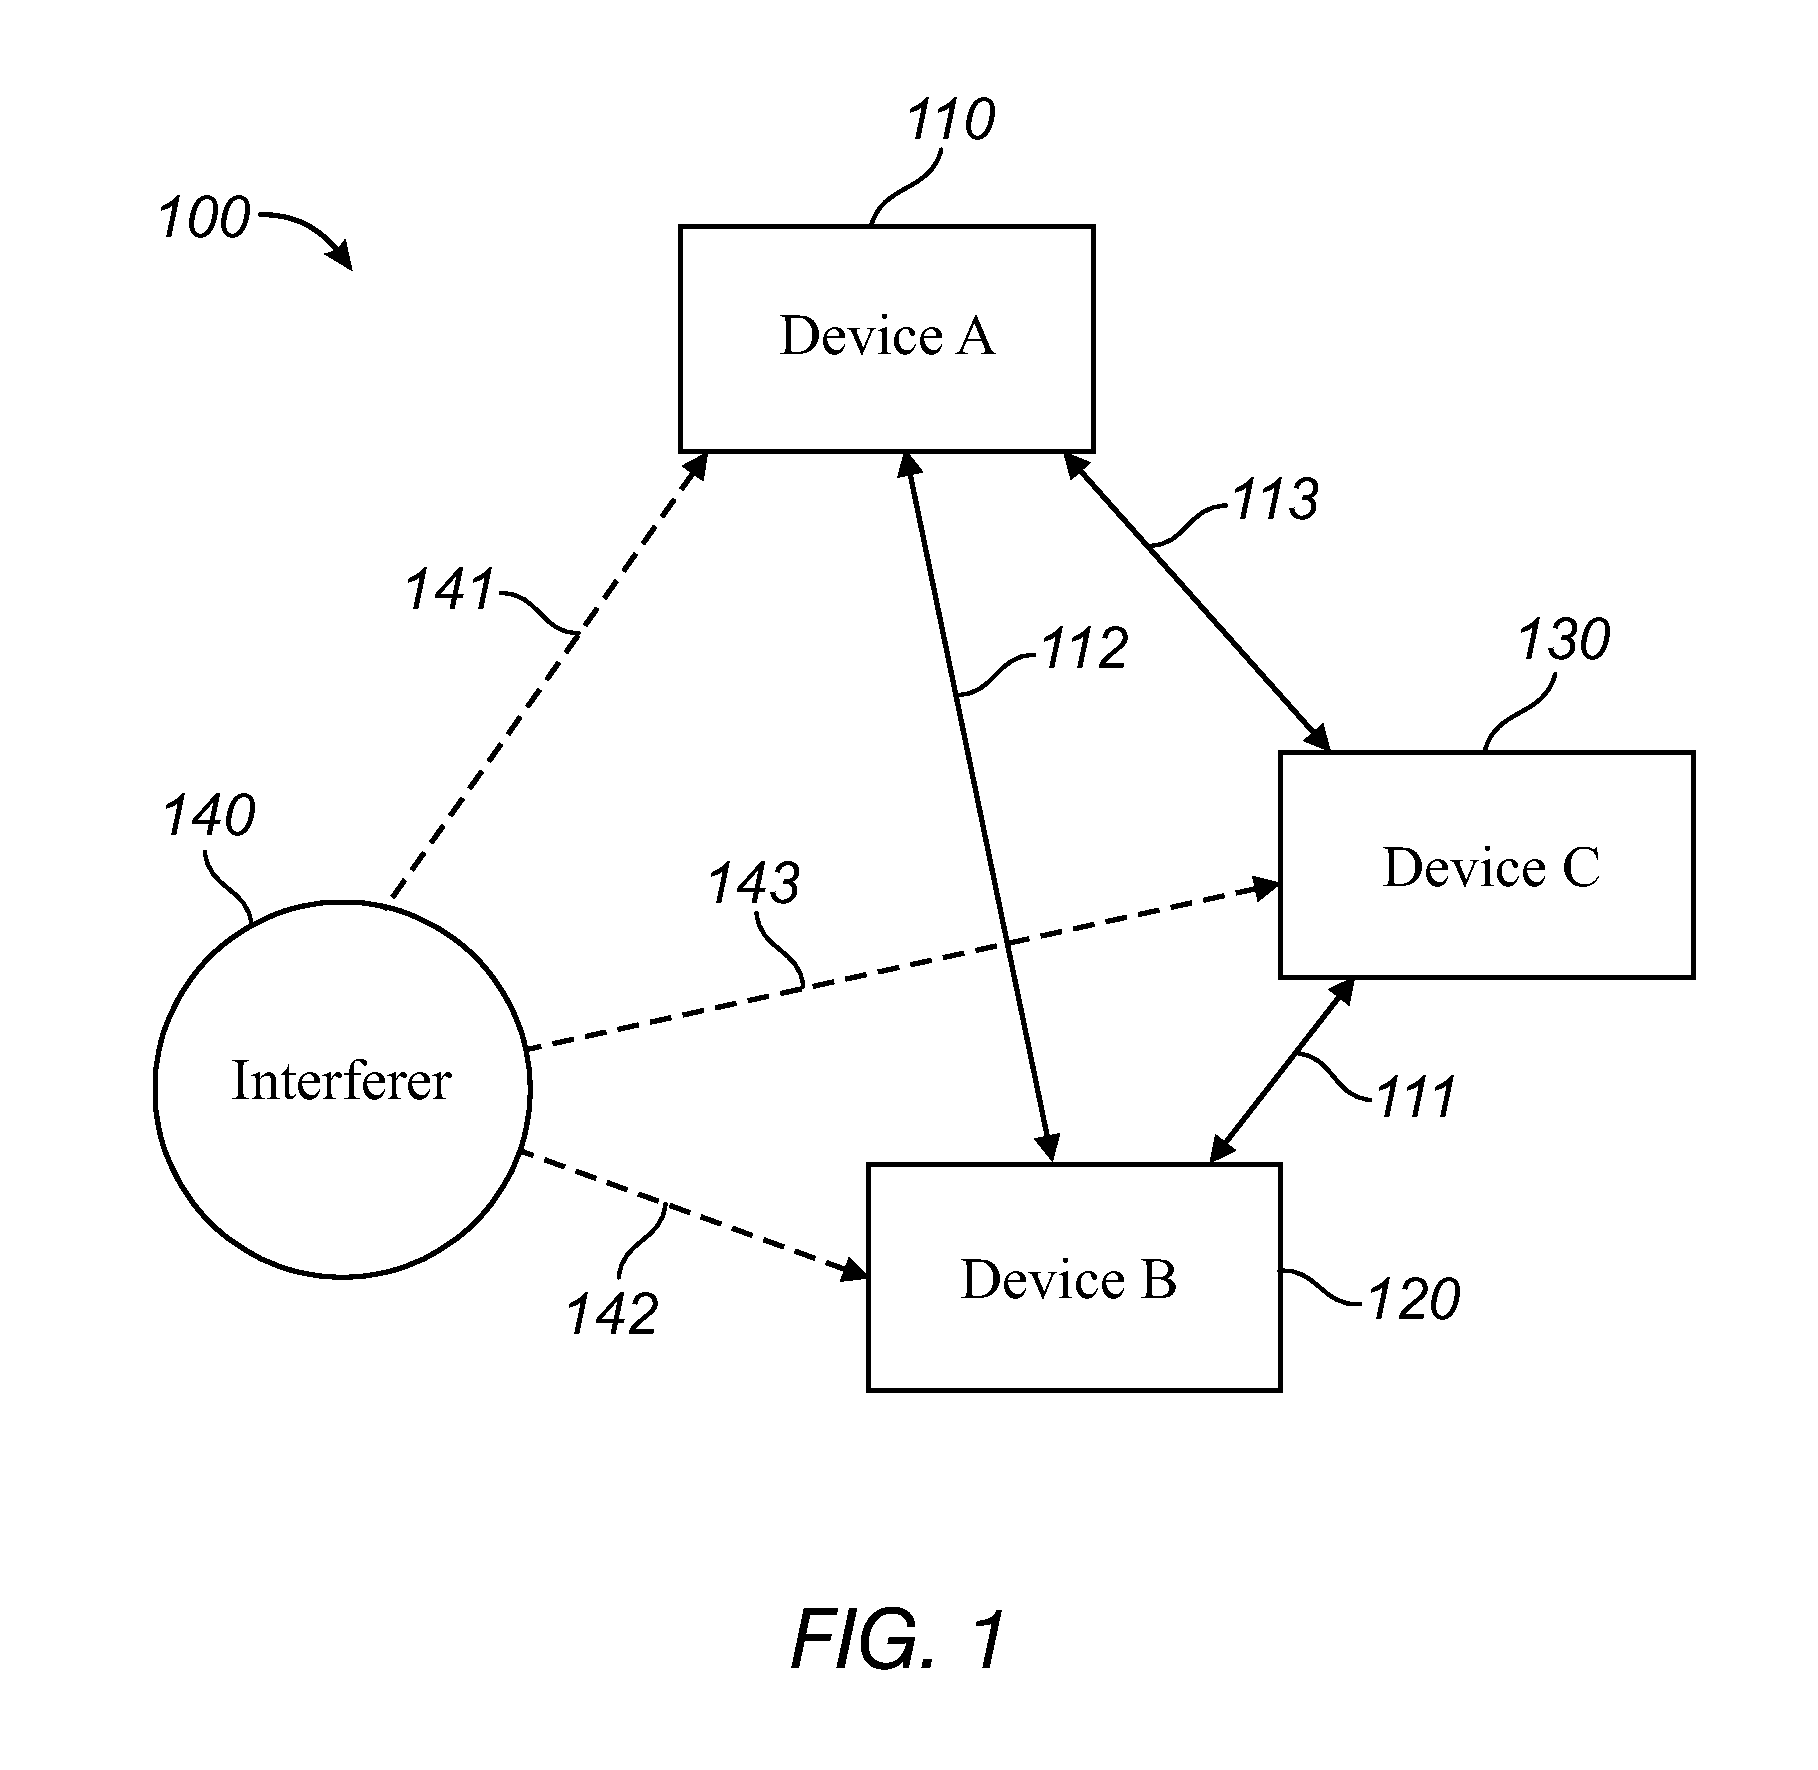 Wideband interference mitigation for devices with multiple receivers